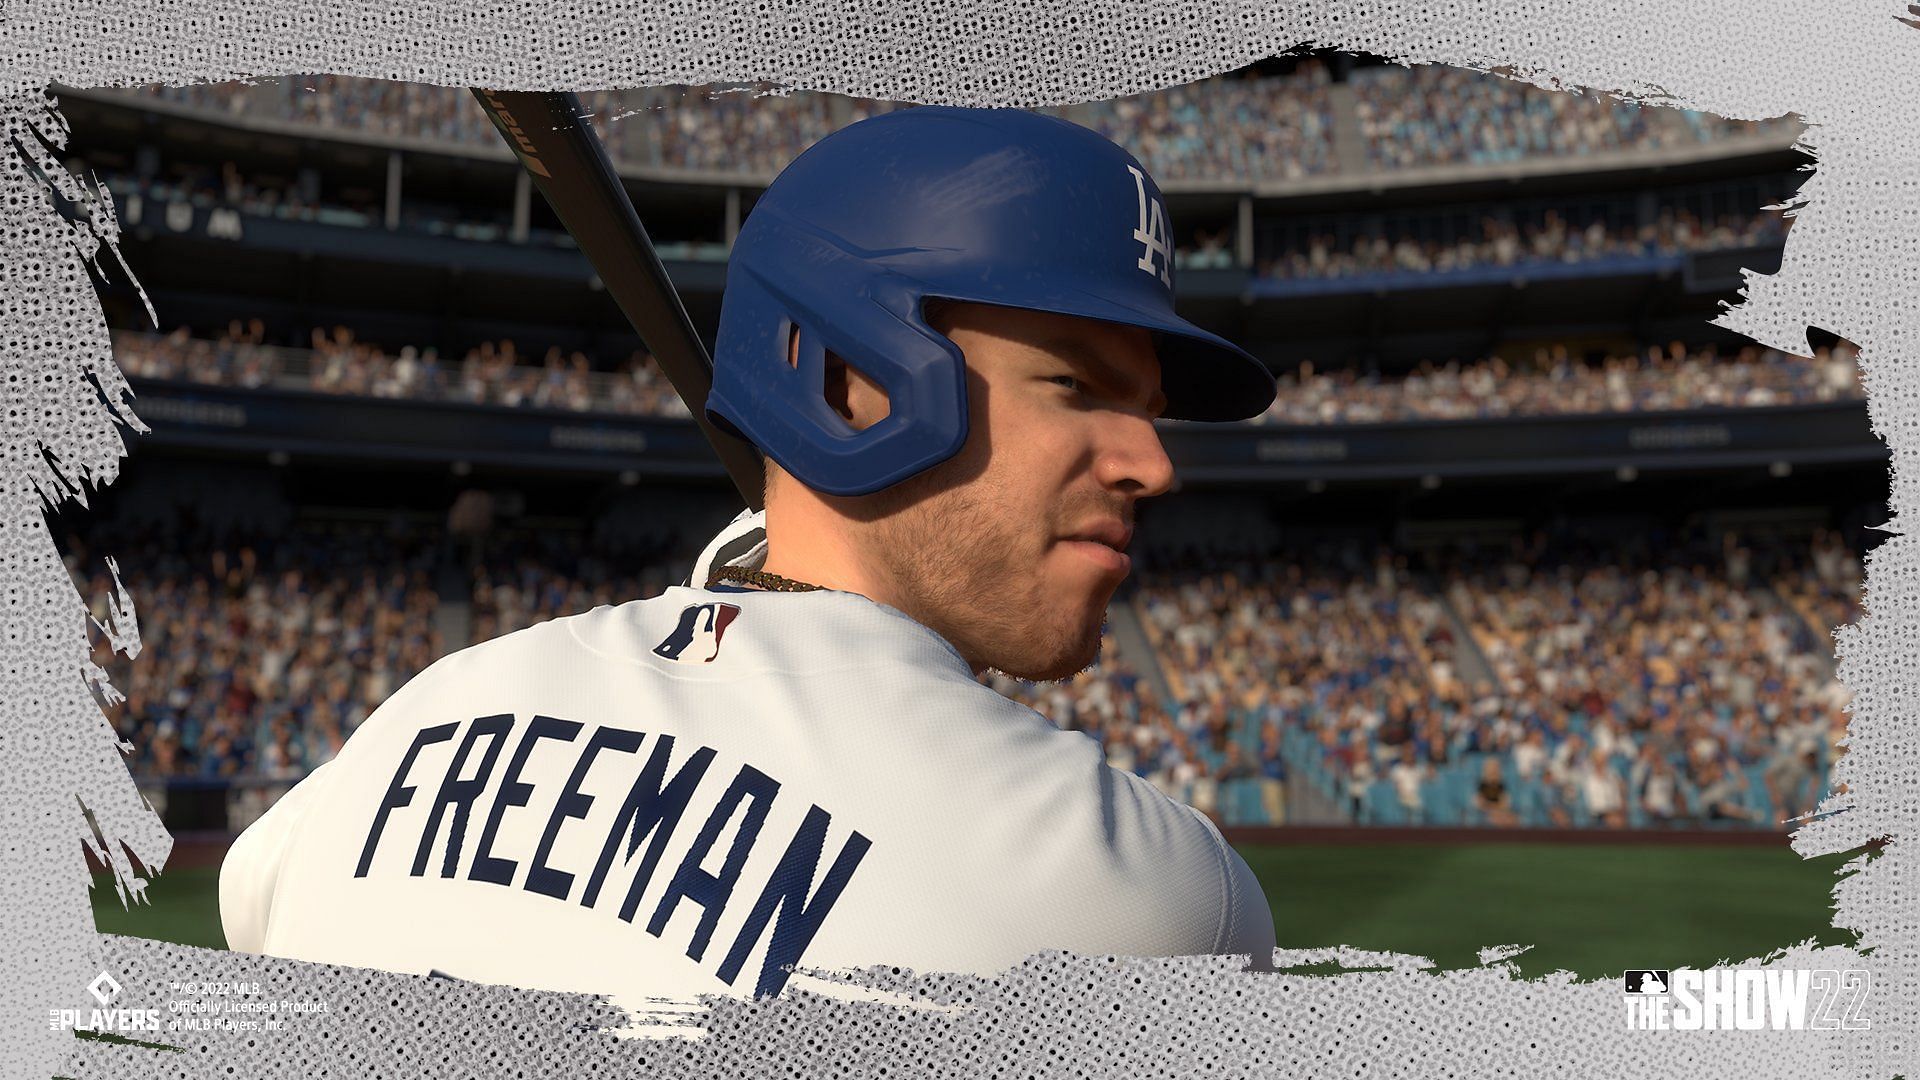 Freddie Freeman in The Show (Image via MLB The Show Twitter page)